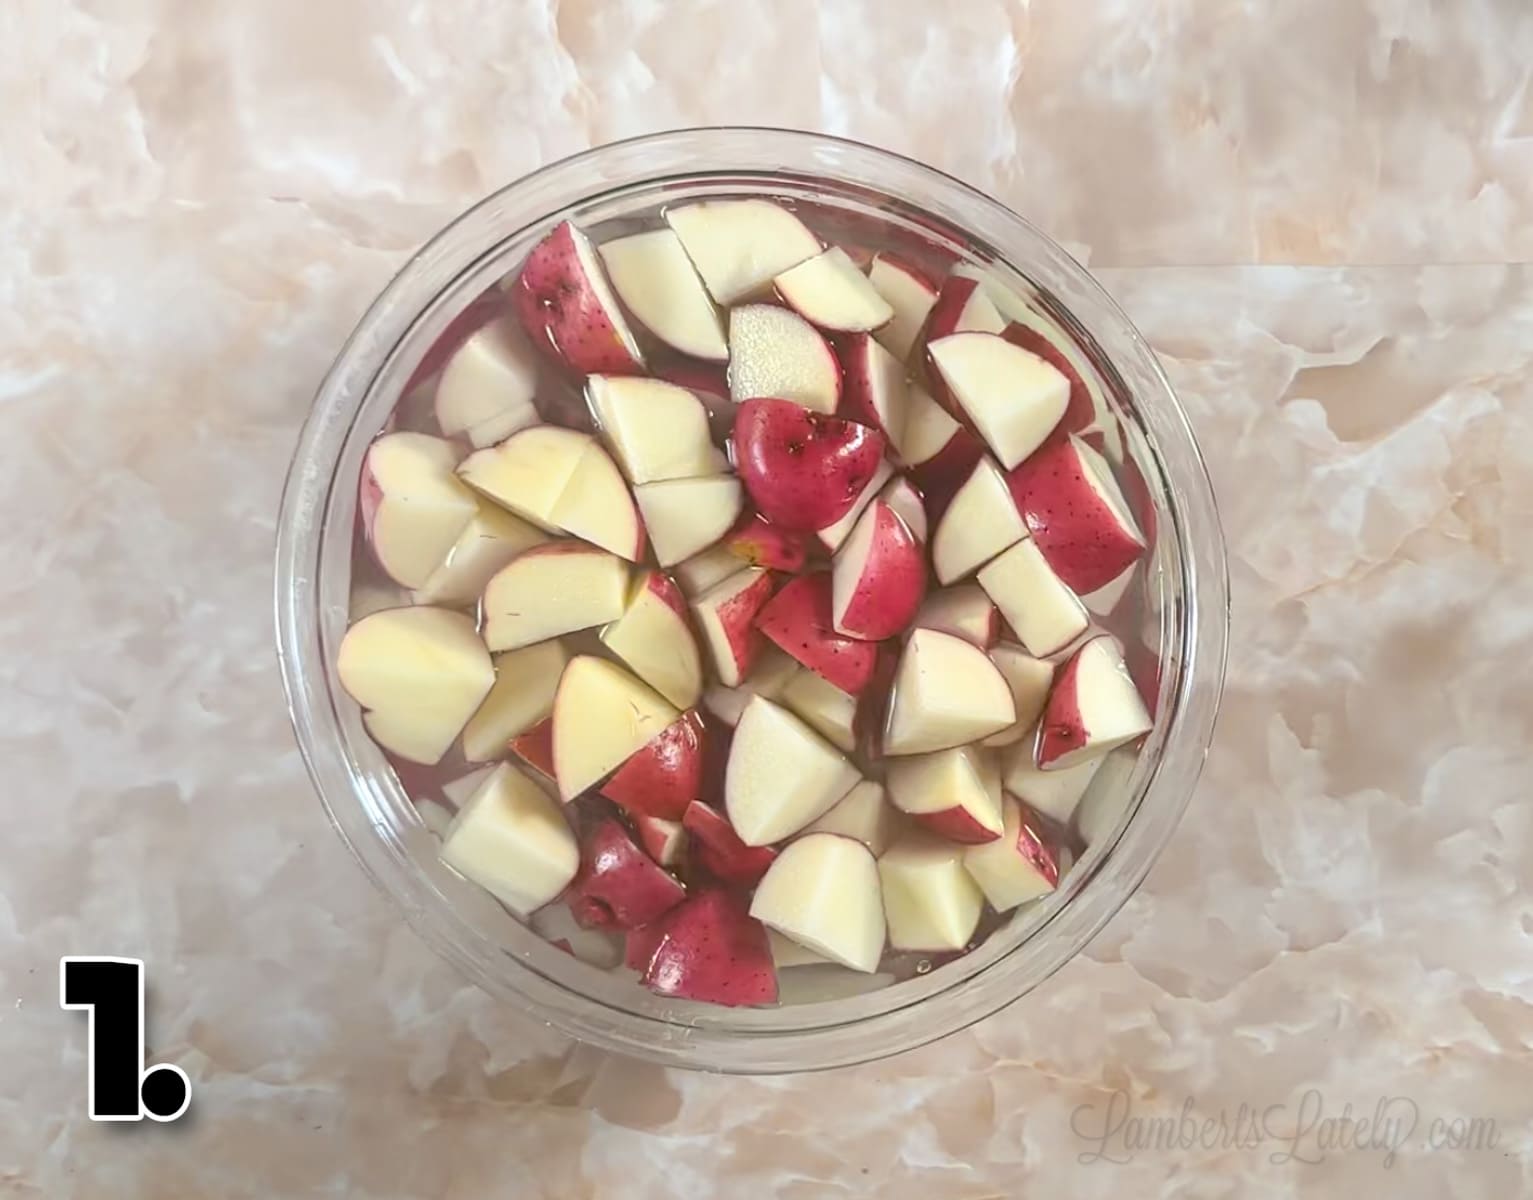 red potatoes, cut into pieces, in a bowl of water.